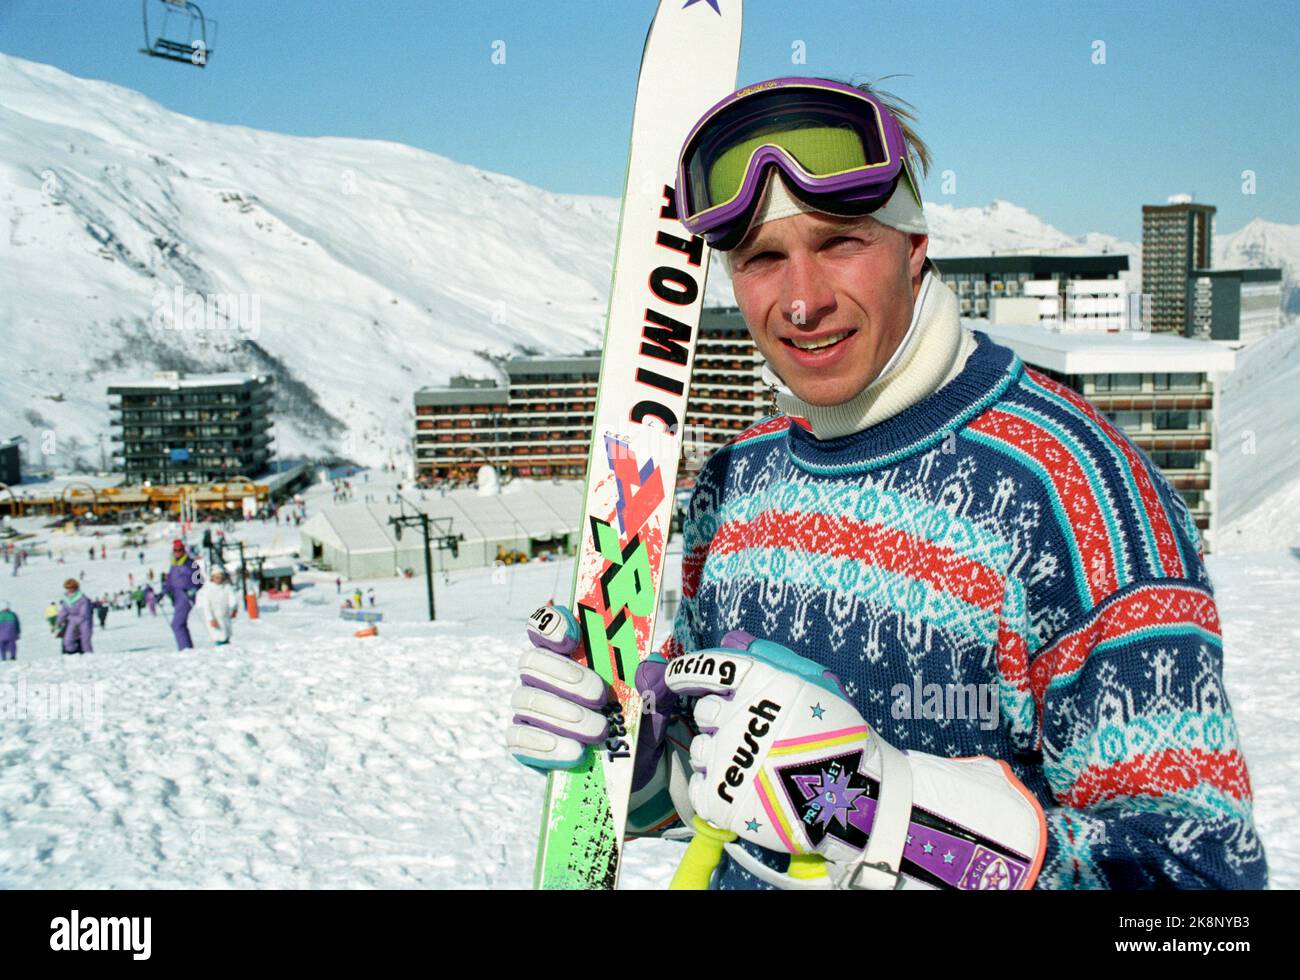 Val d'iser France 19920221 Winter Olympics in Albertville 1992. Training day for the alpinists. Here Ole Kristian Furuseth with Olympic sweater and Atomic Ski. Photo: Bjørn Sigurdsøn / NTB / NTB Stock Photo